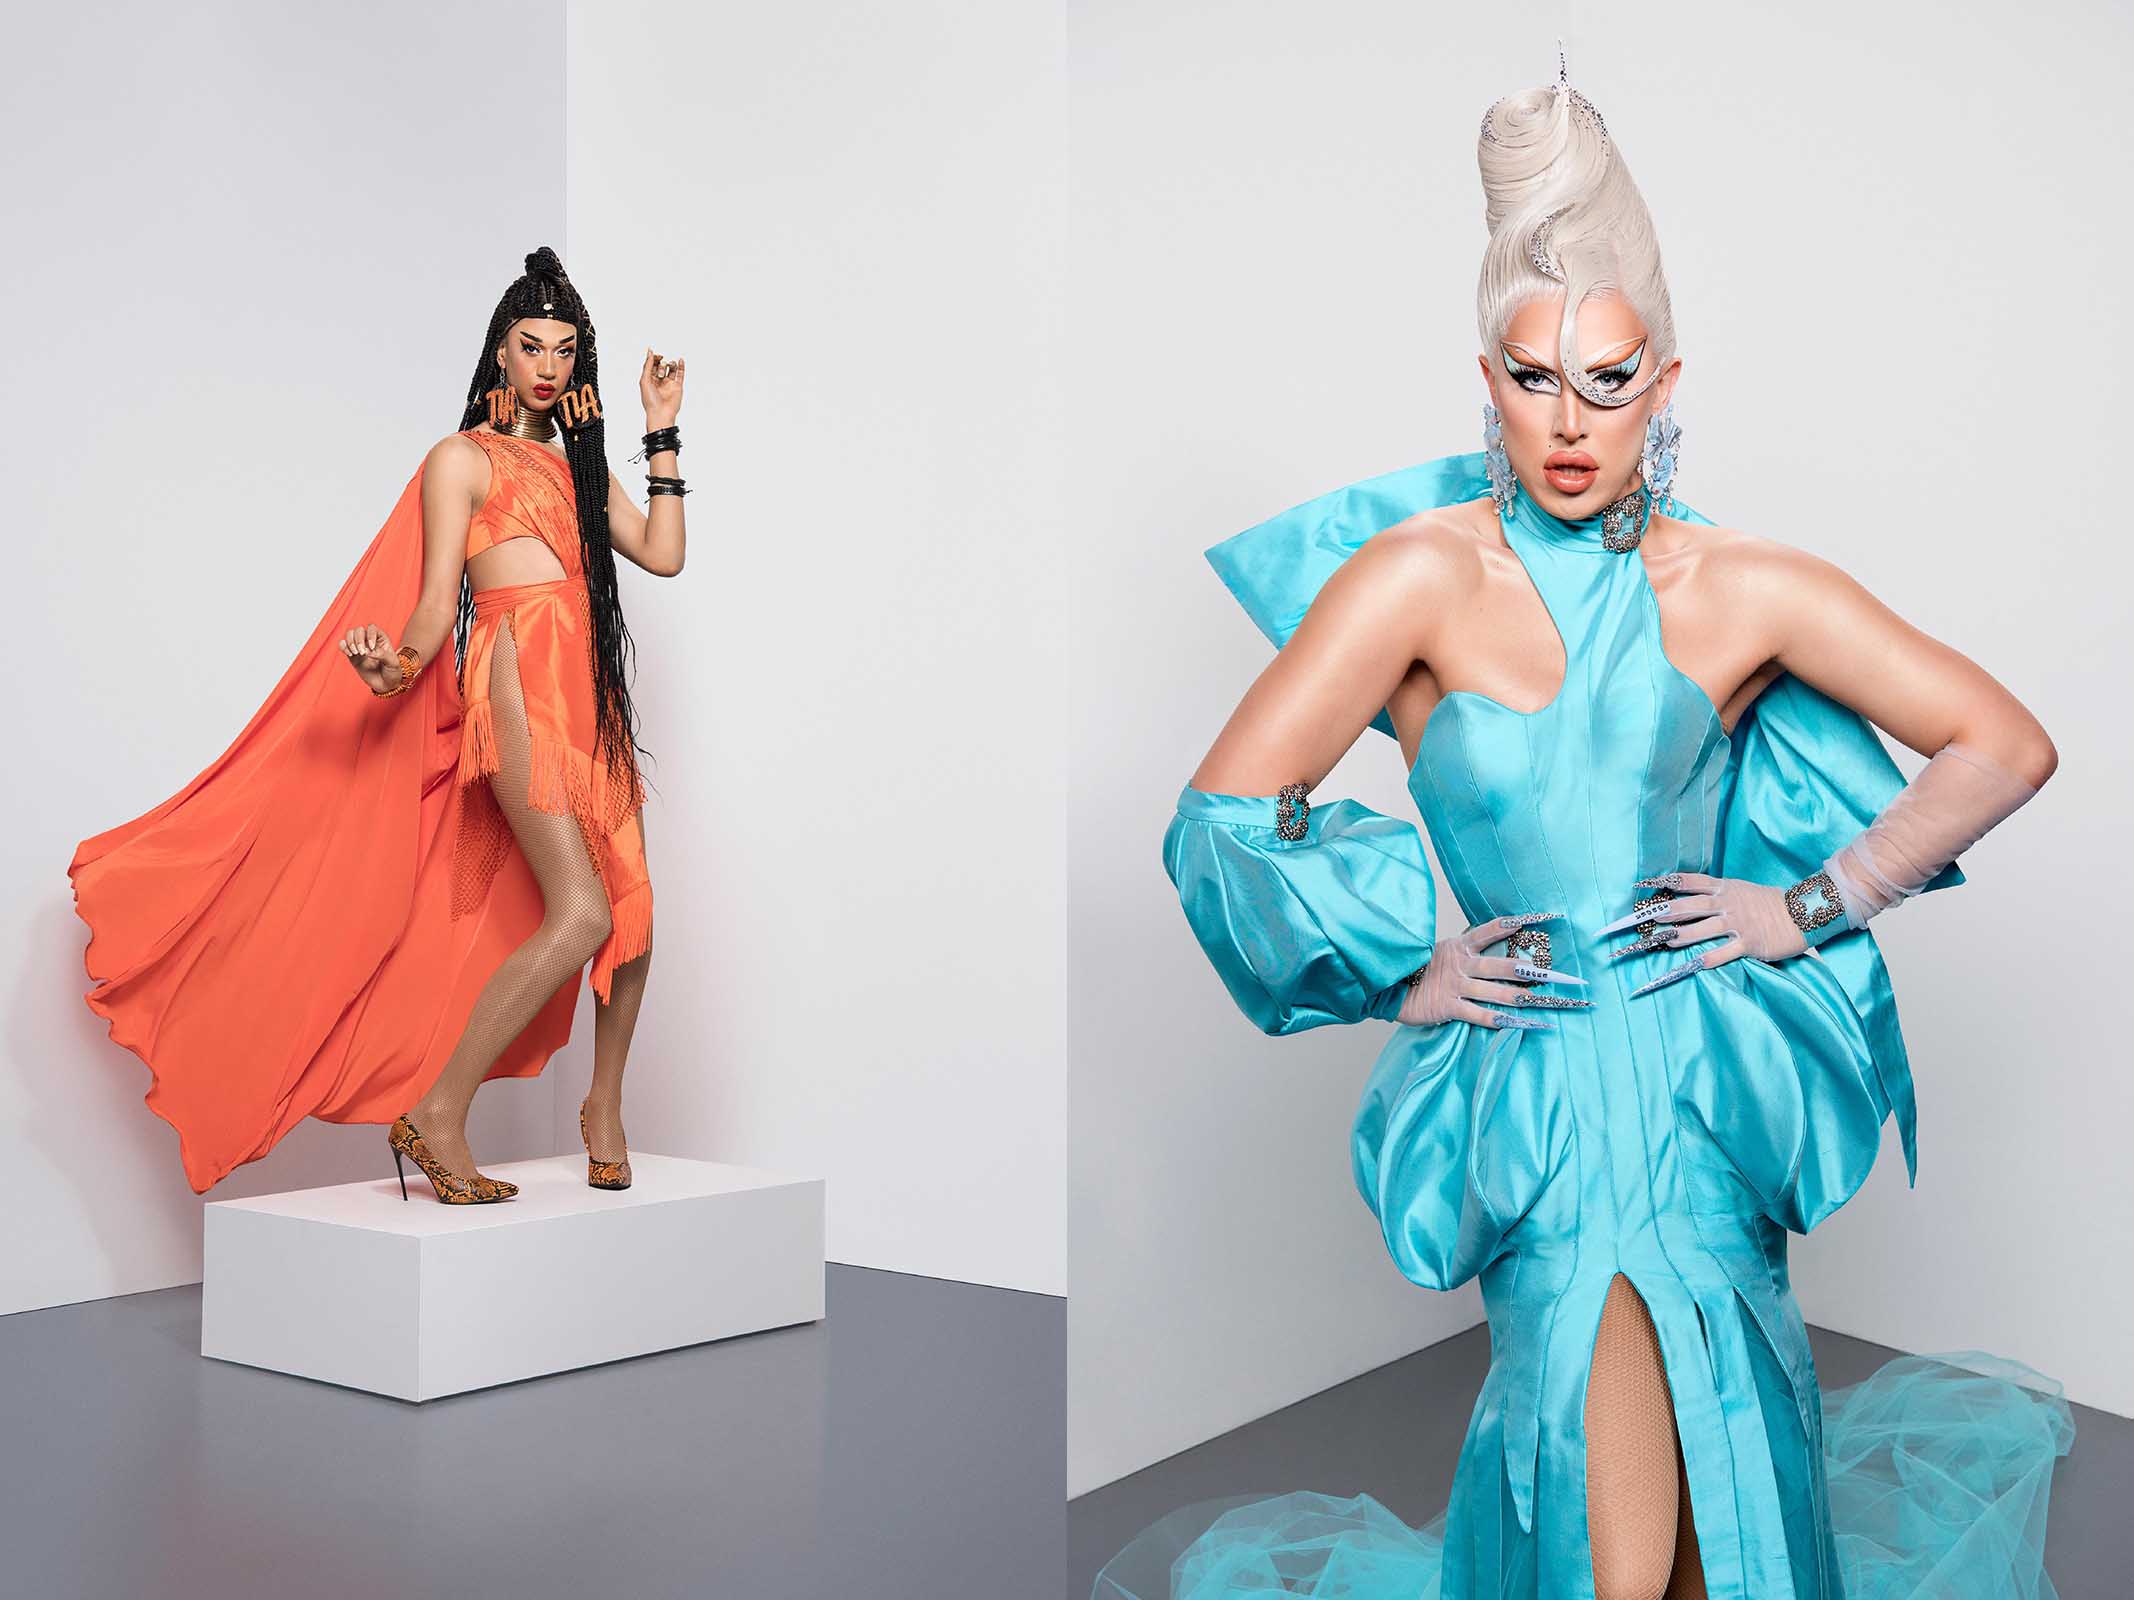 With so many queens already gone, the drama on 'Drag Race UK' is only getting hotter. Here's the rivalries we think are worth watching.